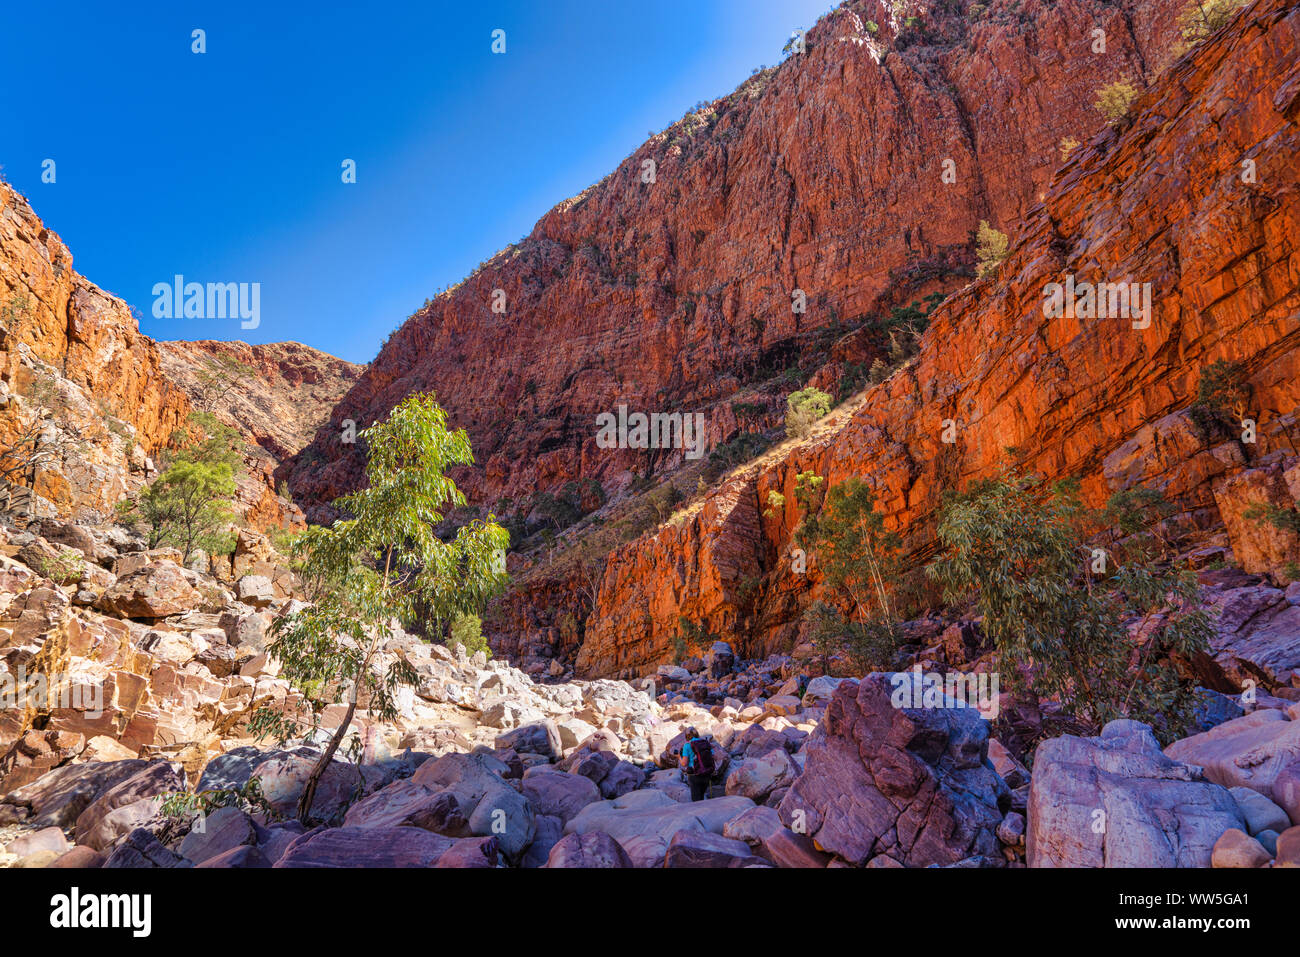 Woman Hiking in Ormiston Gorge, West MacDonnell National Park, Northern Territory, Australia Stock Photo